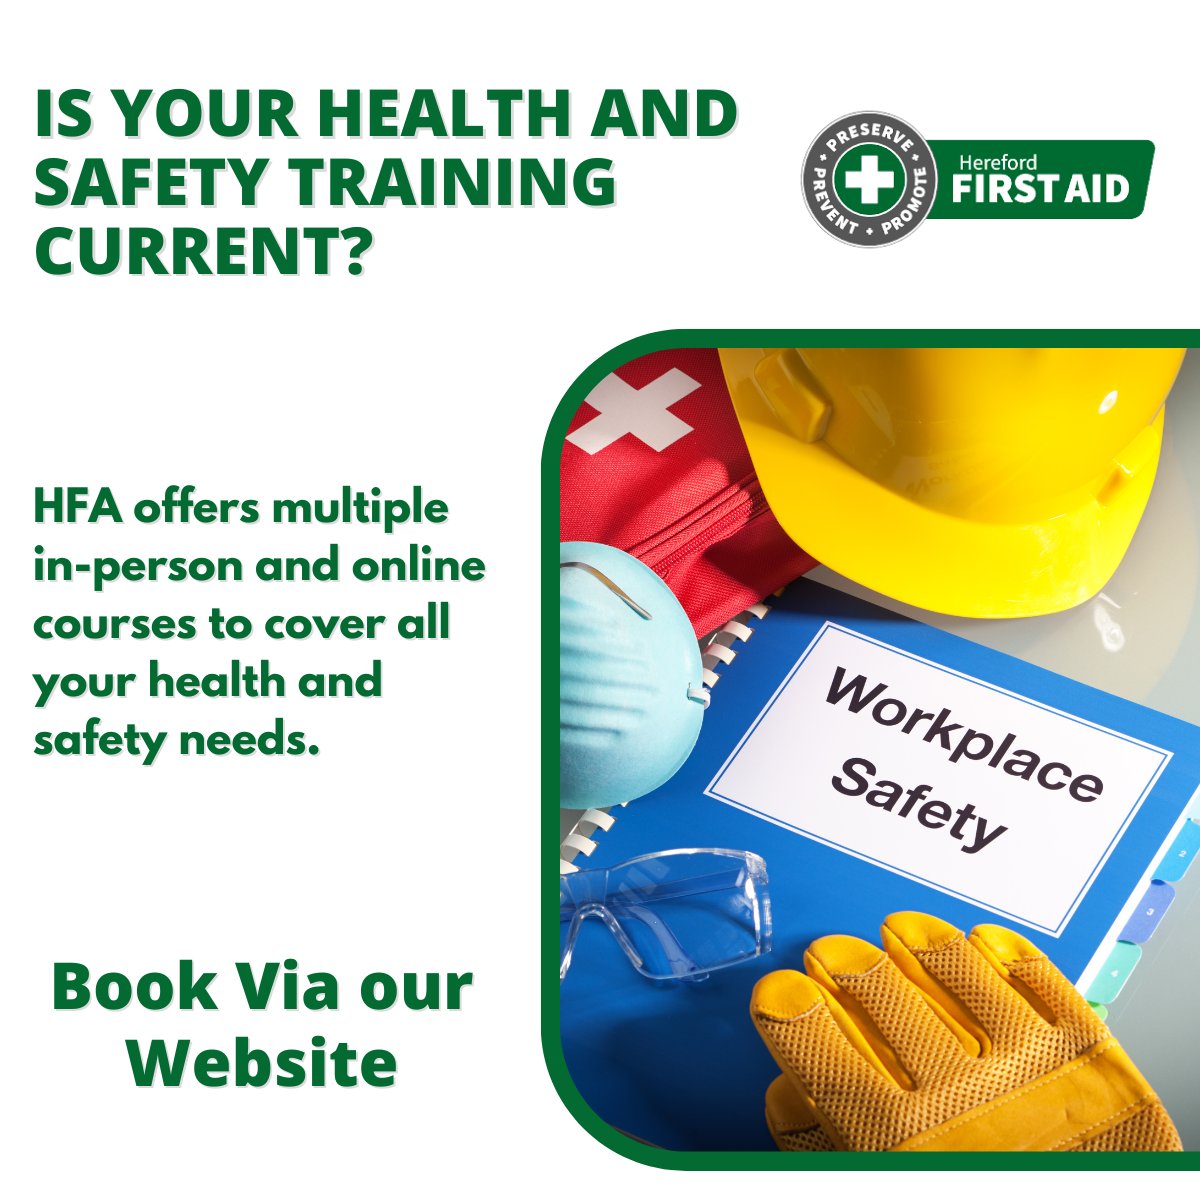 How current is your health & safety training? HFA offers in-person and online courses – find one that works for you on our 2024 schedule. 
herefordfirstaidtraining.co.uk
#HFA #HealthandSafety #CurrentTraining